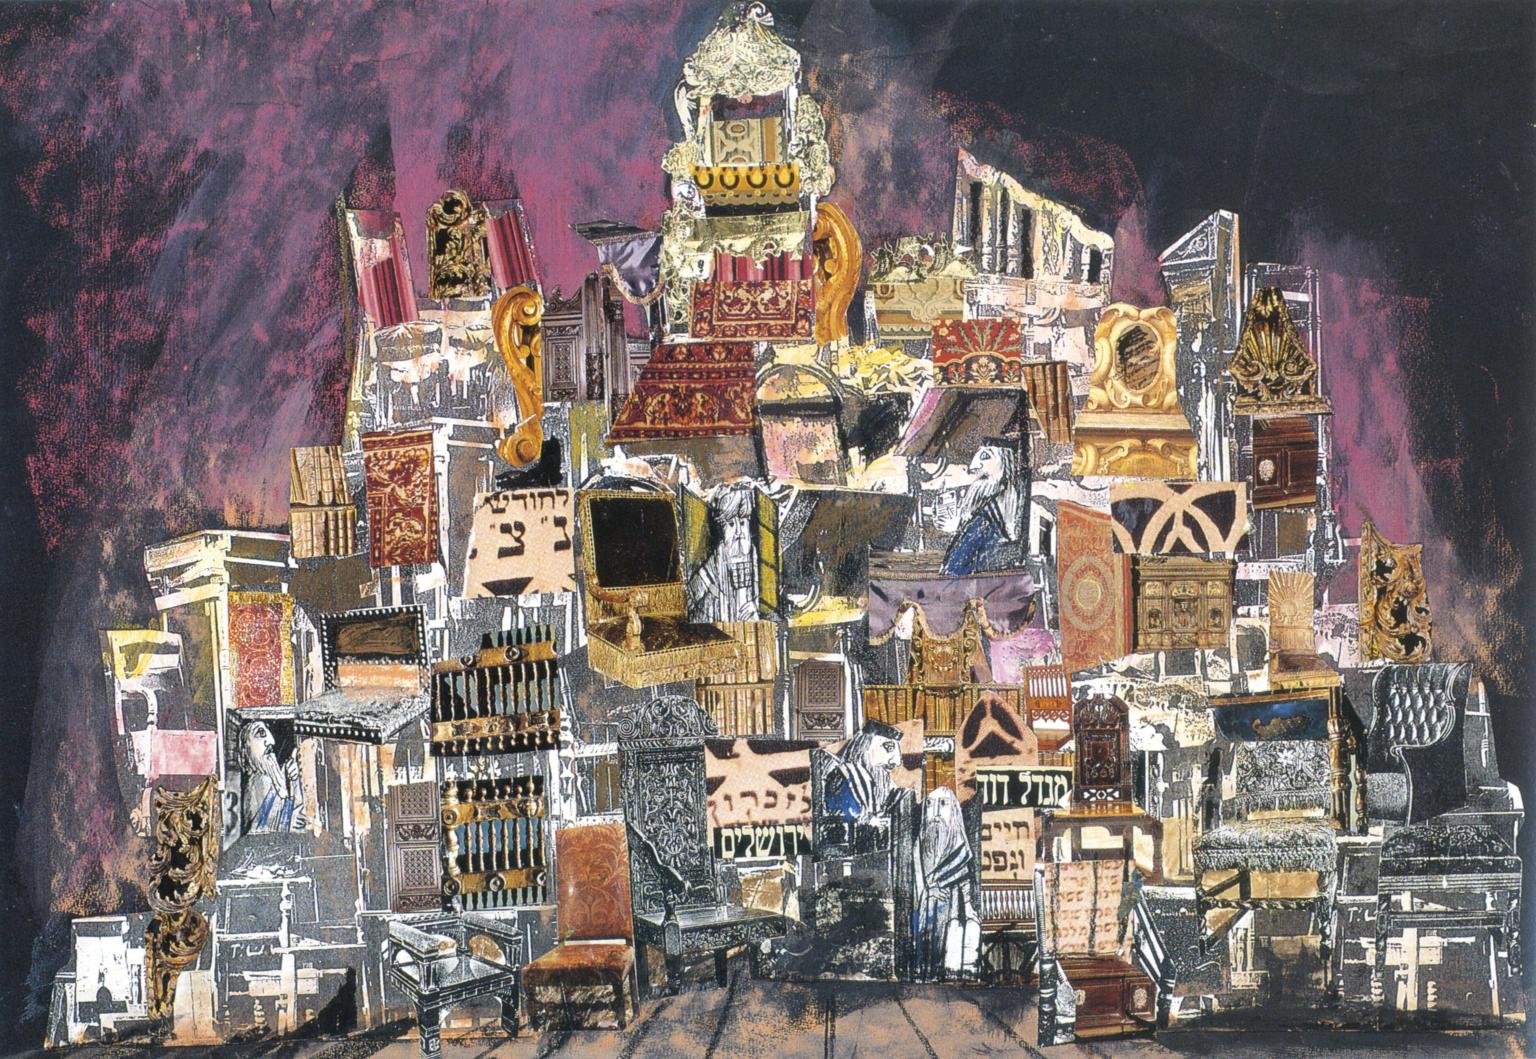 Illustration featuring tall stack of chairs made of different collage patterns, including Hebrew letters and faces, and traditional dining room chairs. 